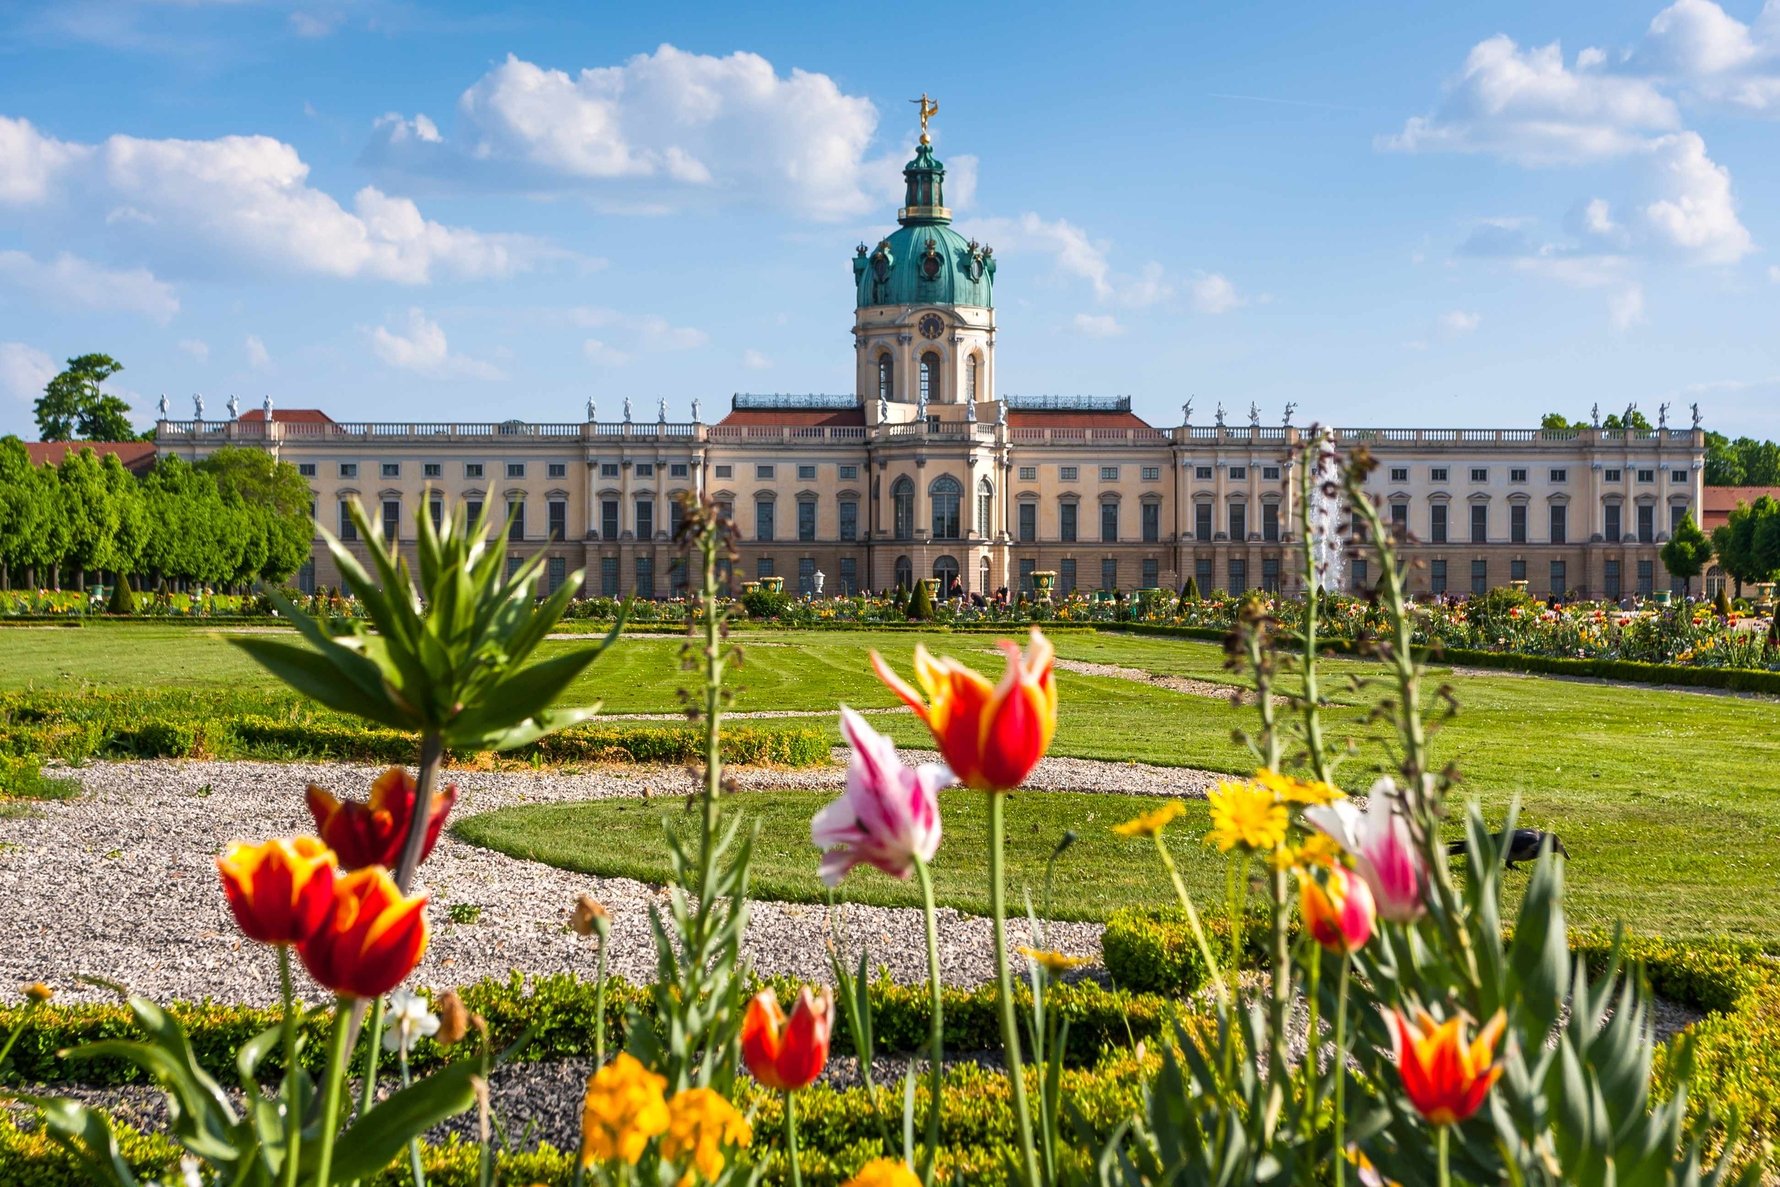 Schloss Charlottenburg is Berlin’s largest royal residence, and it is almost guaranteed to make you feel like genuine royalty. Slap on your finest wears and jump on the M45 bus for the full experience. You won’t actually become a prince or princess, but if you close your eyes tight enough